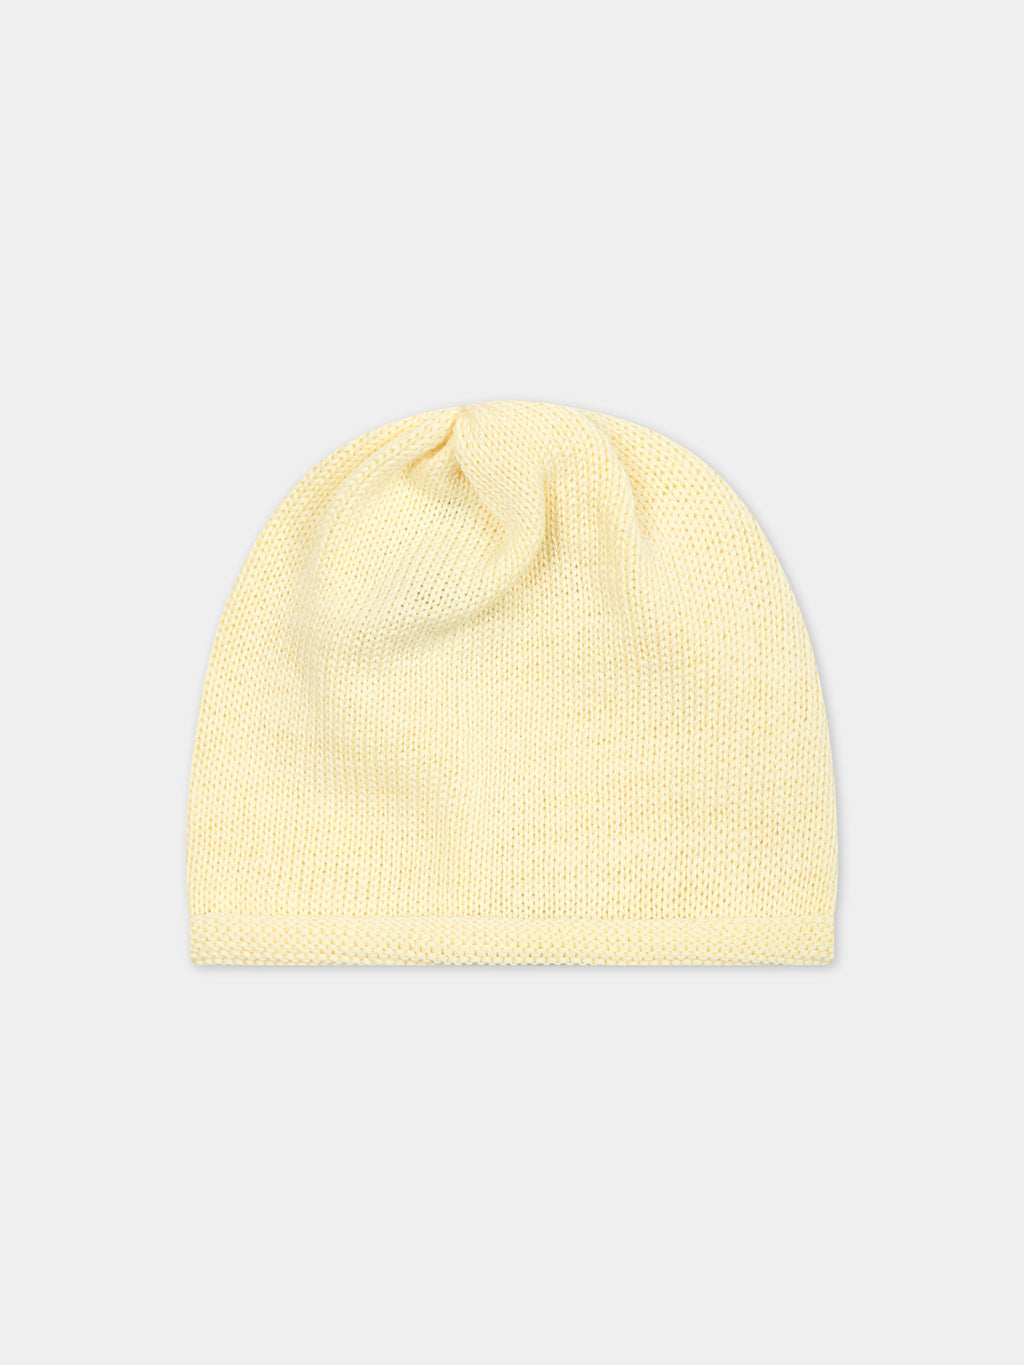 Yellow hat for baby kids